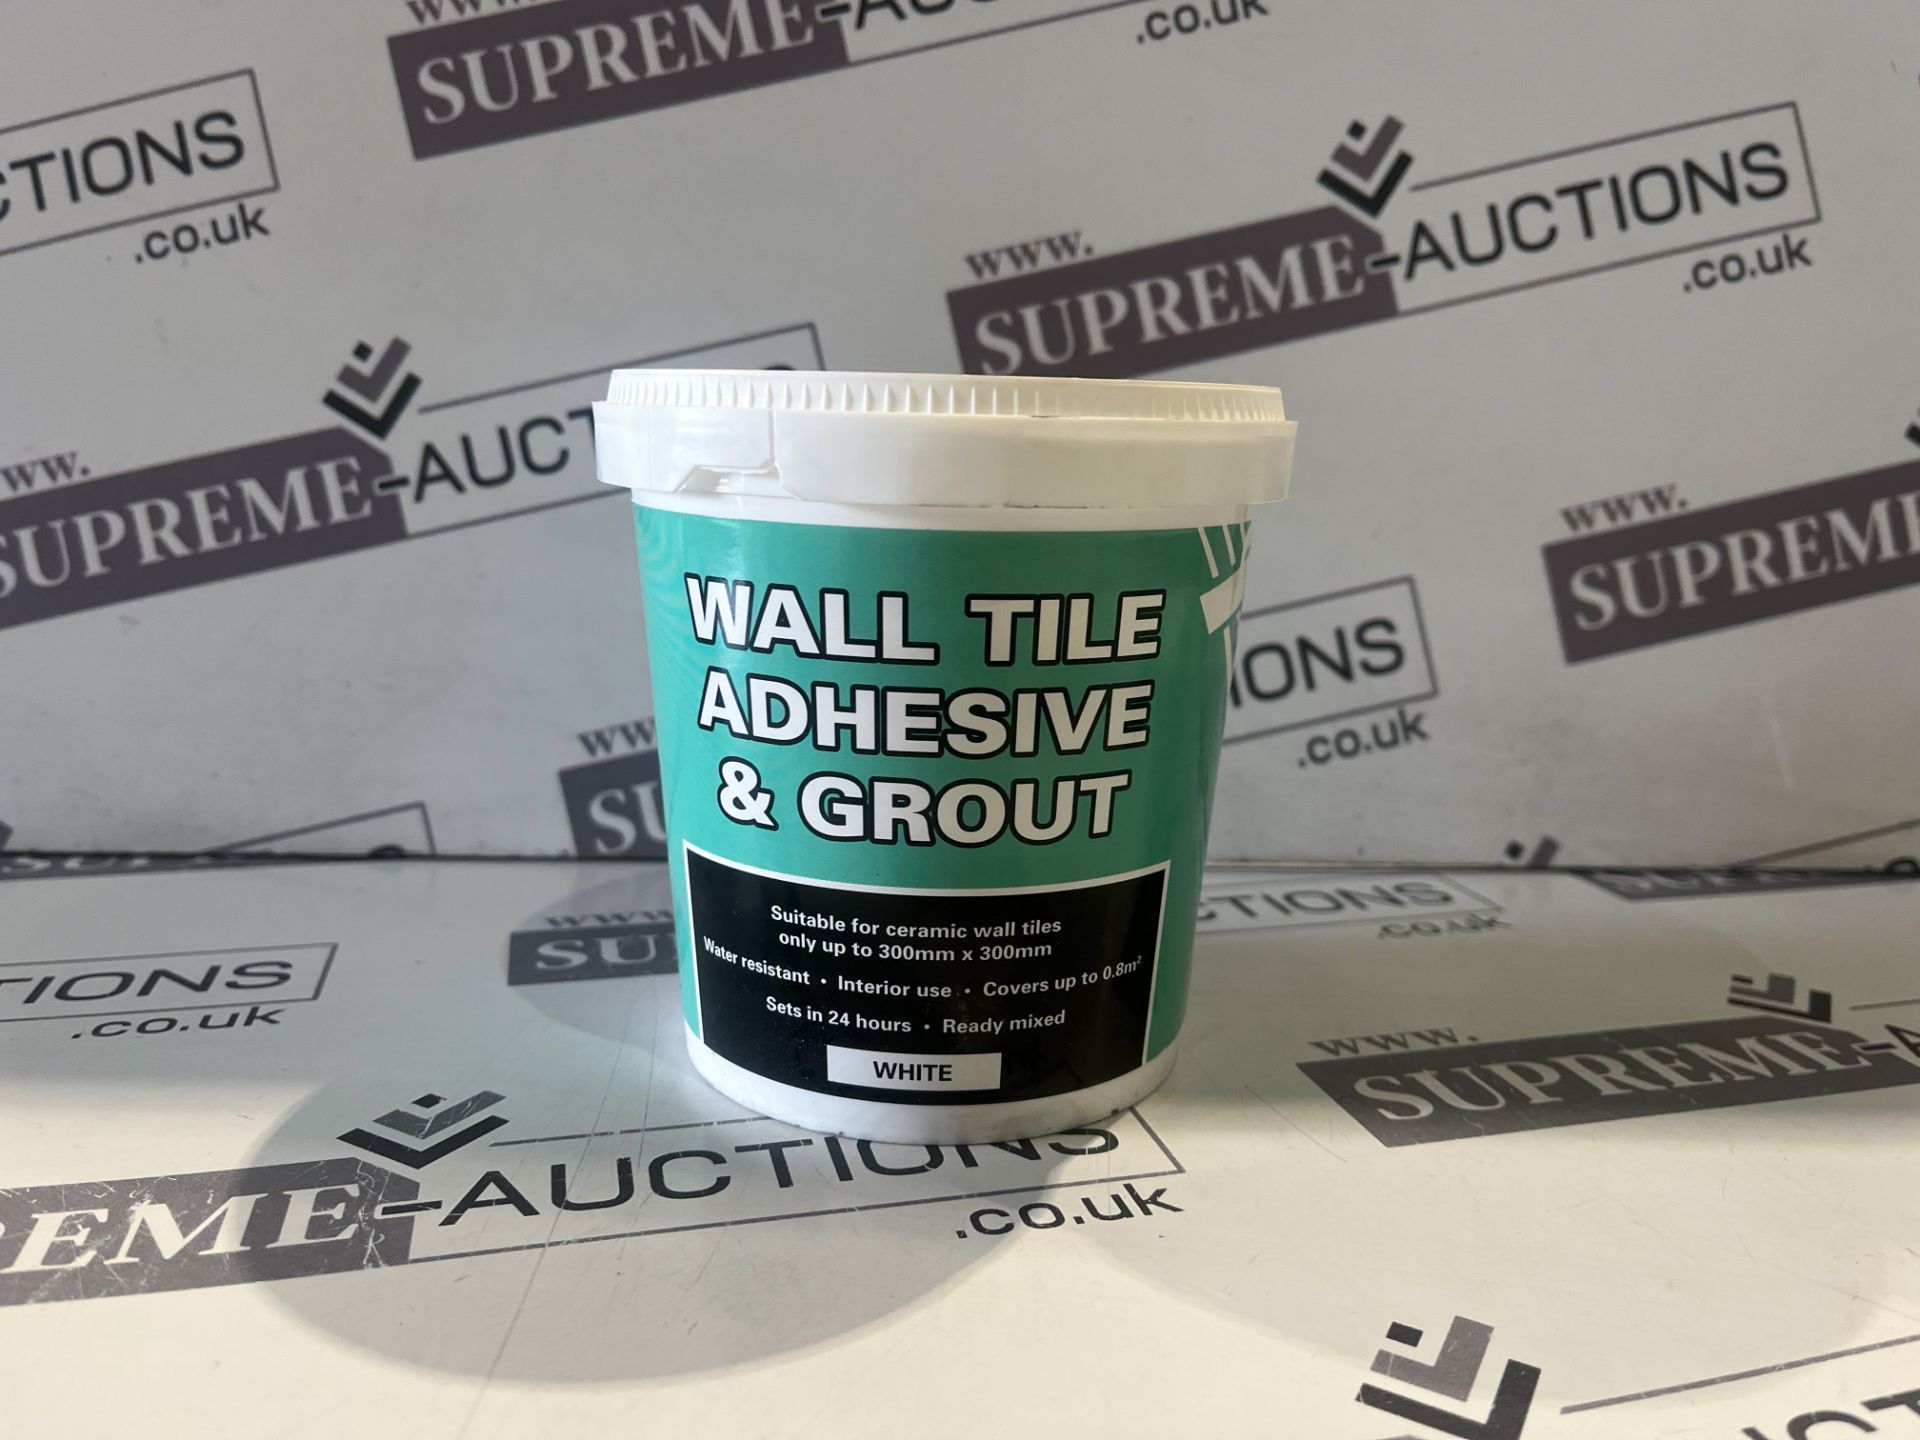 120 X 1KG TUBS OF WALL TILE ADHESIVE & GROUT. SUITABLE FOR CERAMIC WALL TILES. SETS IN 24 HOURS. - Image 2 of 2